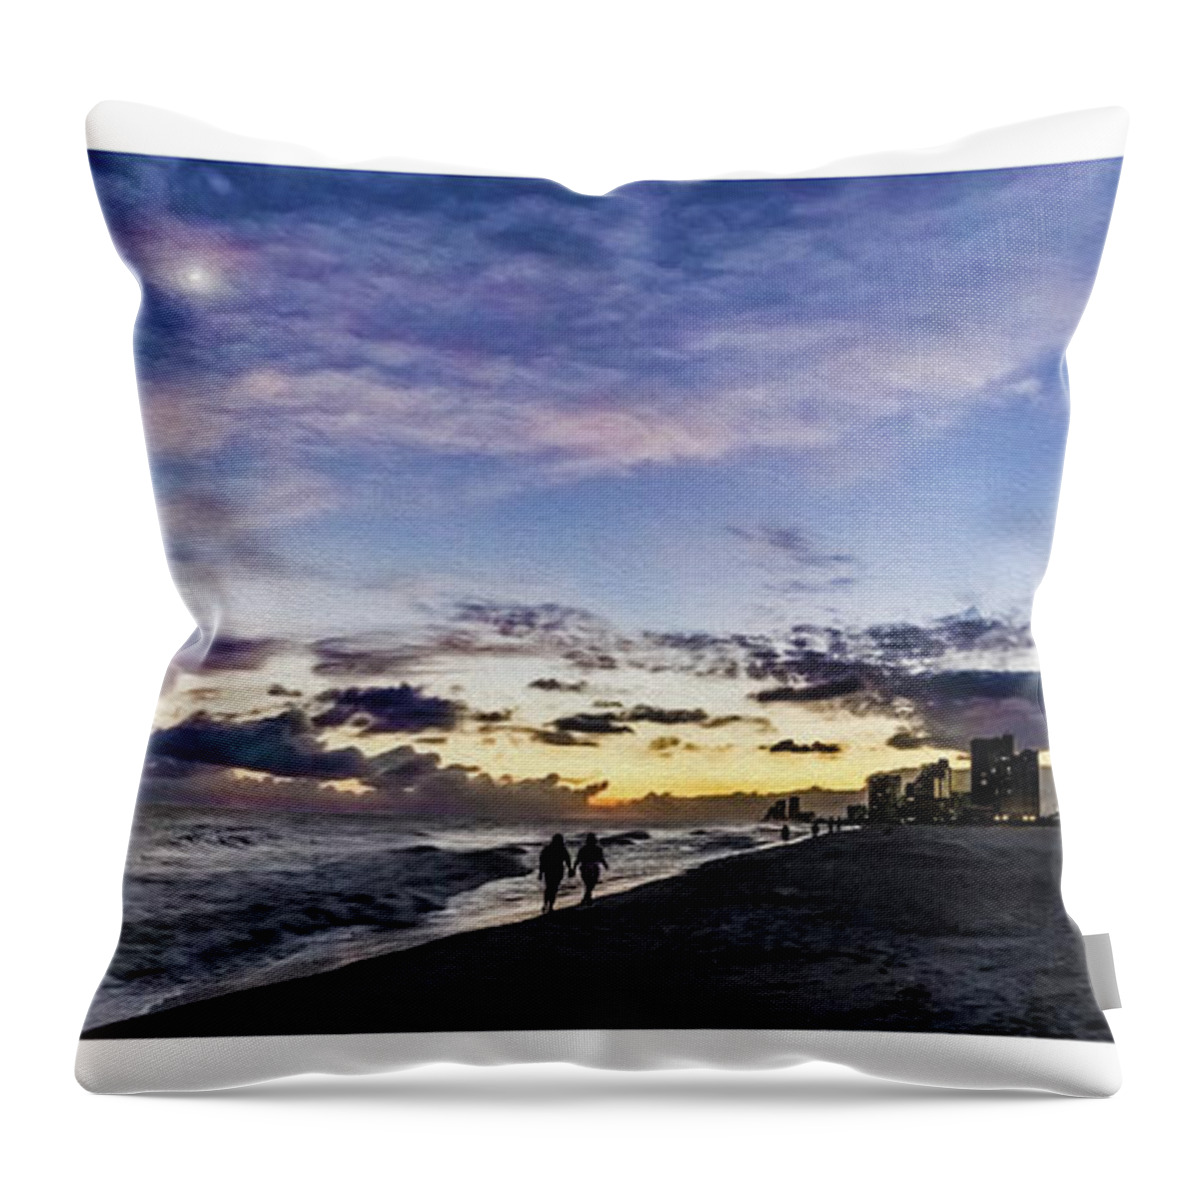 Al Throw Pillow featuring the photograph Moonlit Beach Sunset Seascape 0272b1 by Ricardos Creations